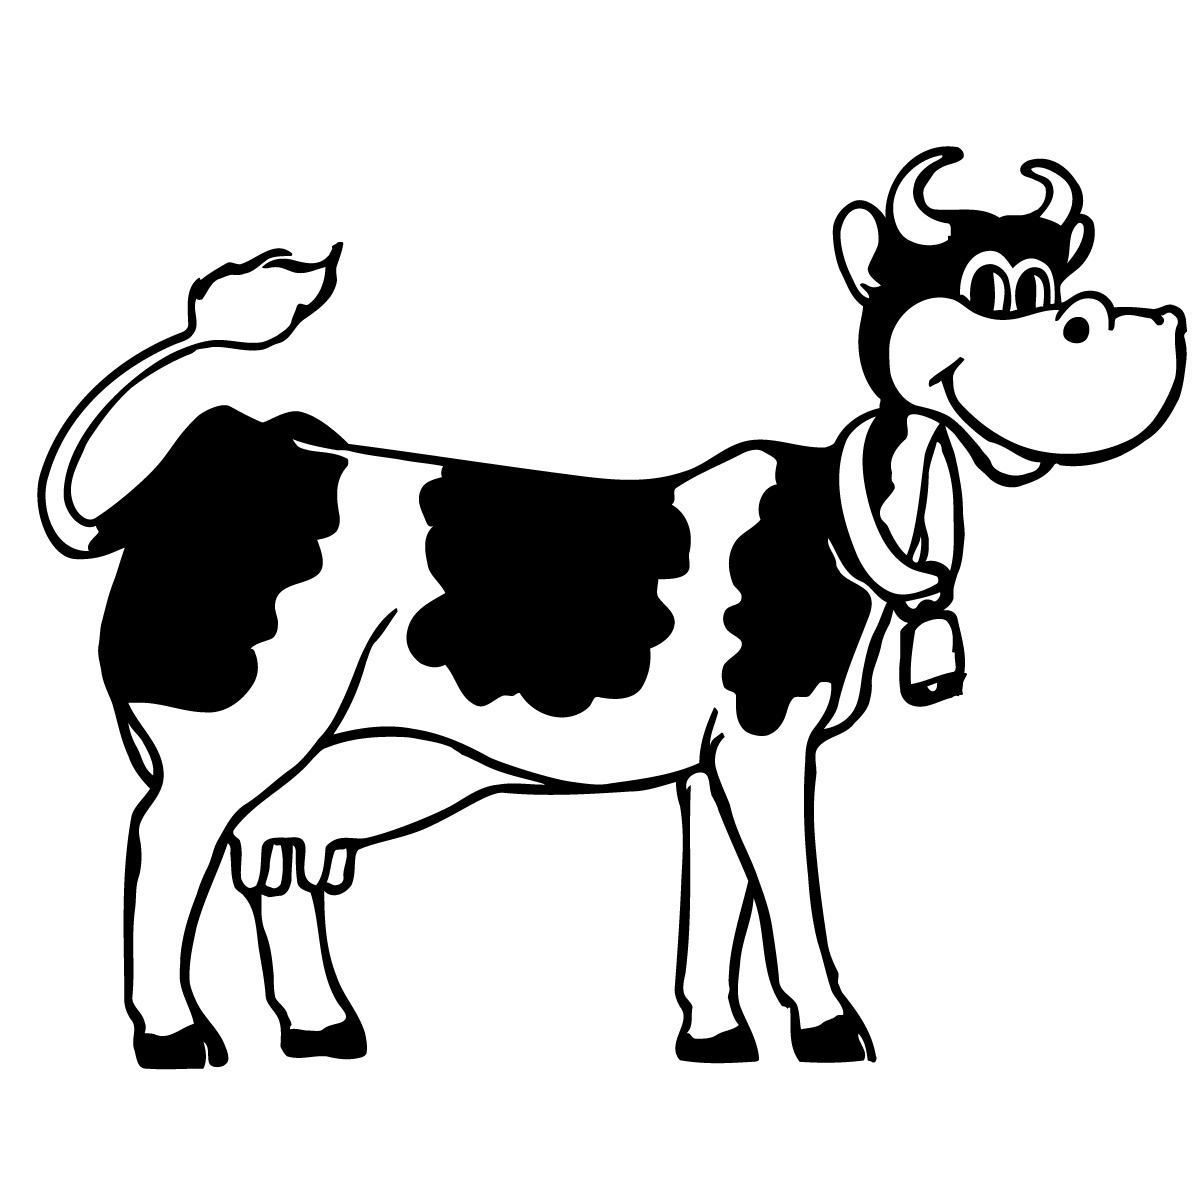 Cows Drawings Images - ClipArt Best